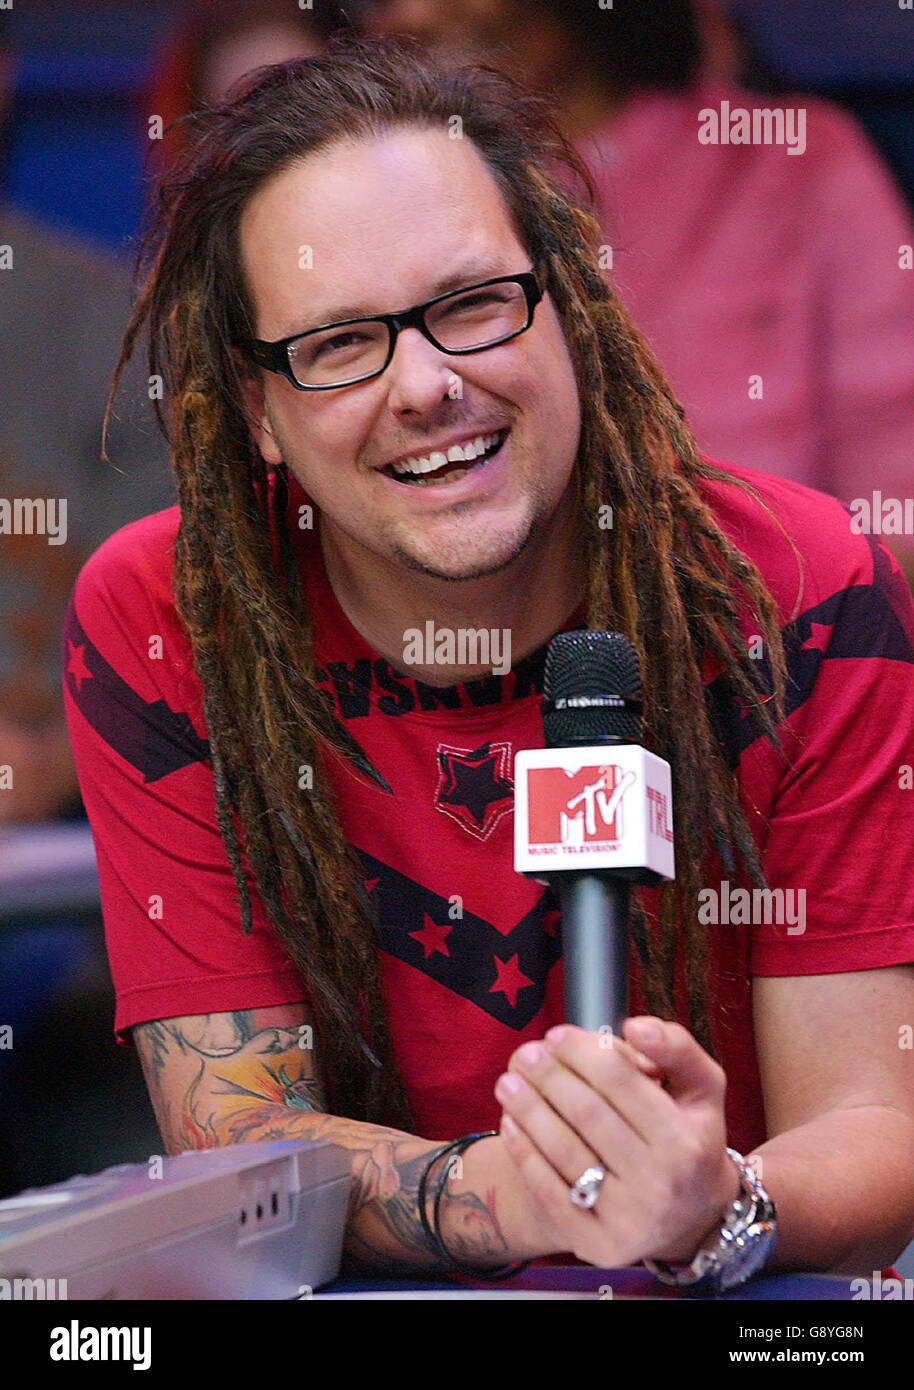 Jonathan Davis of the band Korn during his guest appearance on MTV's TRL (Total Request Live) show, live from the MTV studios, Leicester Square, central London, Friday 21 October 2005. PRESS ASSOCIATION Photo. Photo credit should read : Anthony Harvey/PA Stock Photo